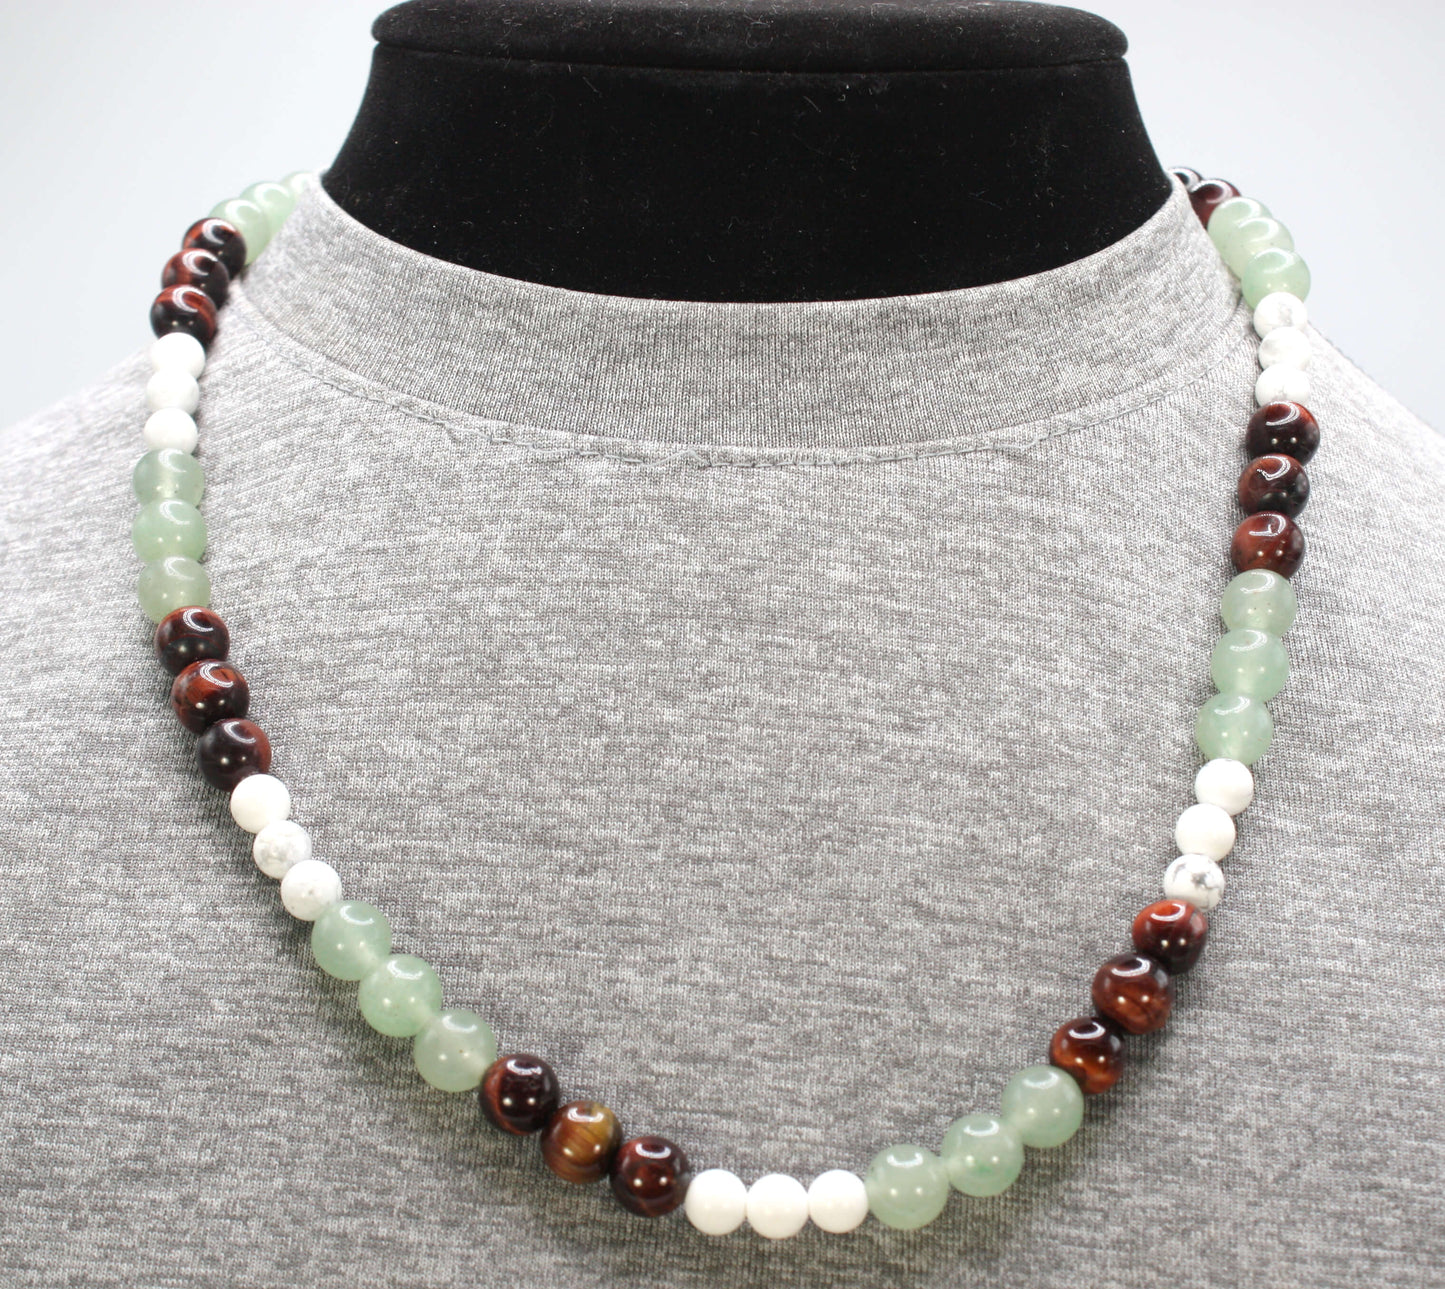 Genuine Howlite, Green Adventurine, Red Tiger Eye Necklace - For Men/Women - 6mm & 8mm Beads - Mexico Necklace